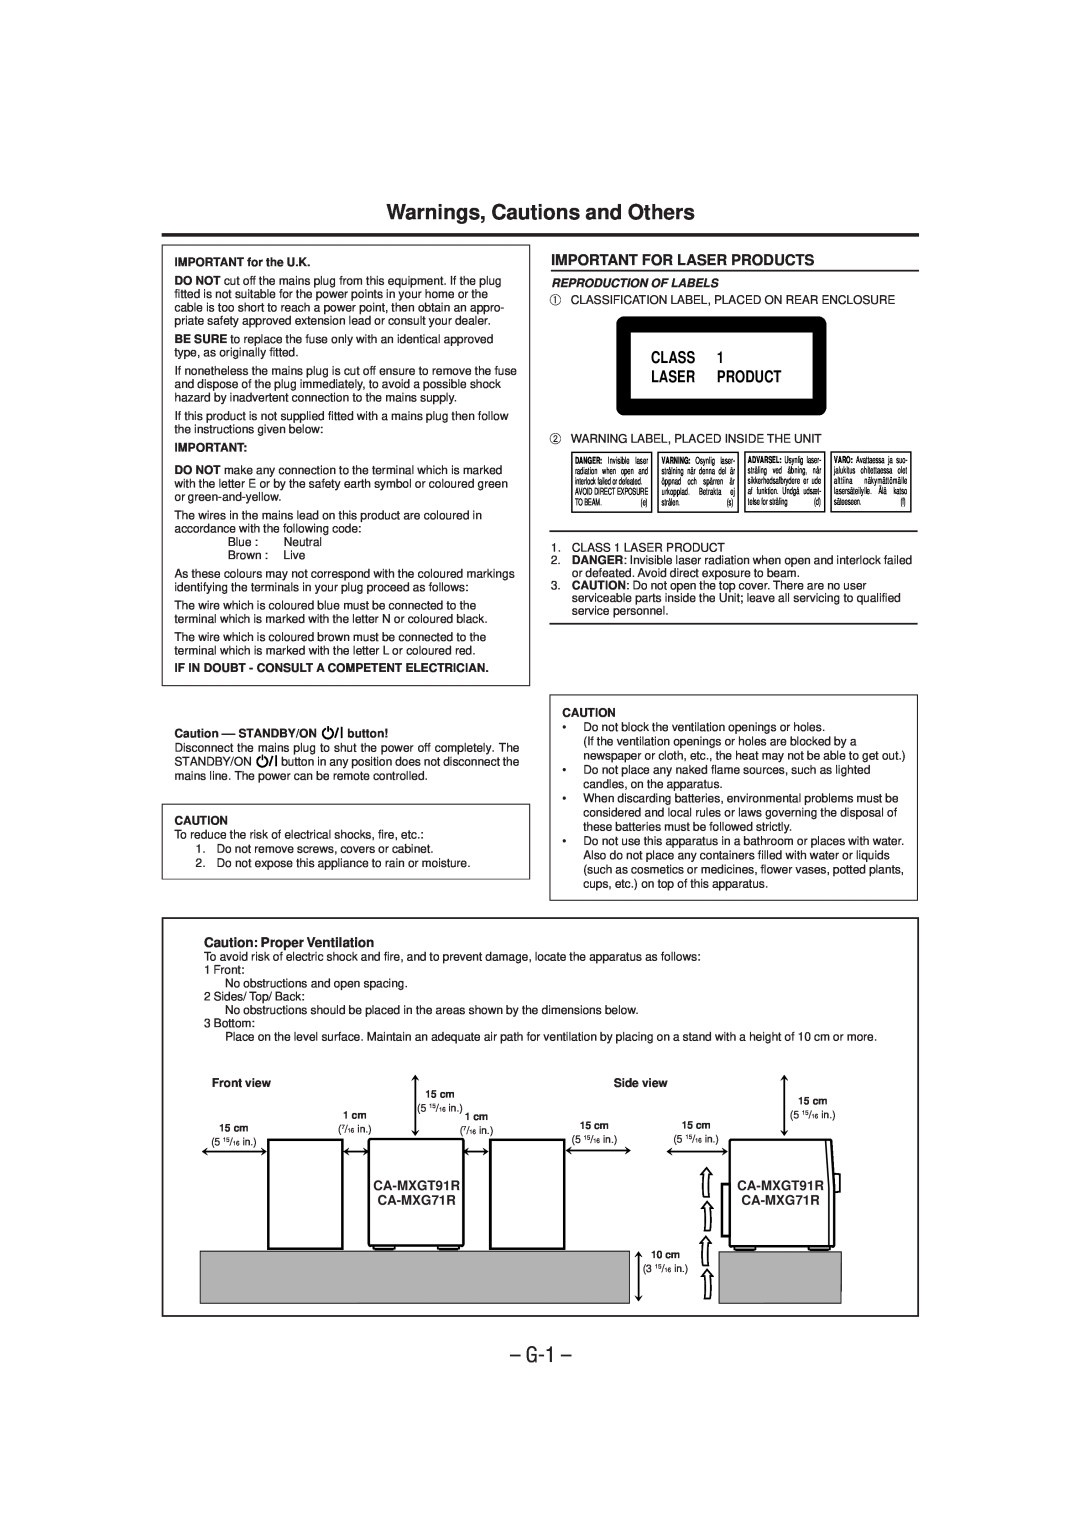 JVC GVT0052-008A manual Warnings, Cautions and Others, G-1, Class Laser Product, Important For Laser Products, Front view 